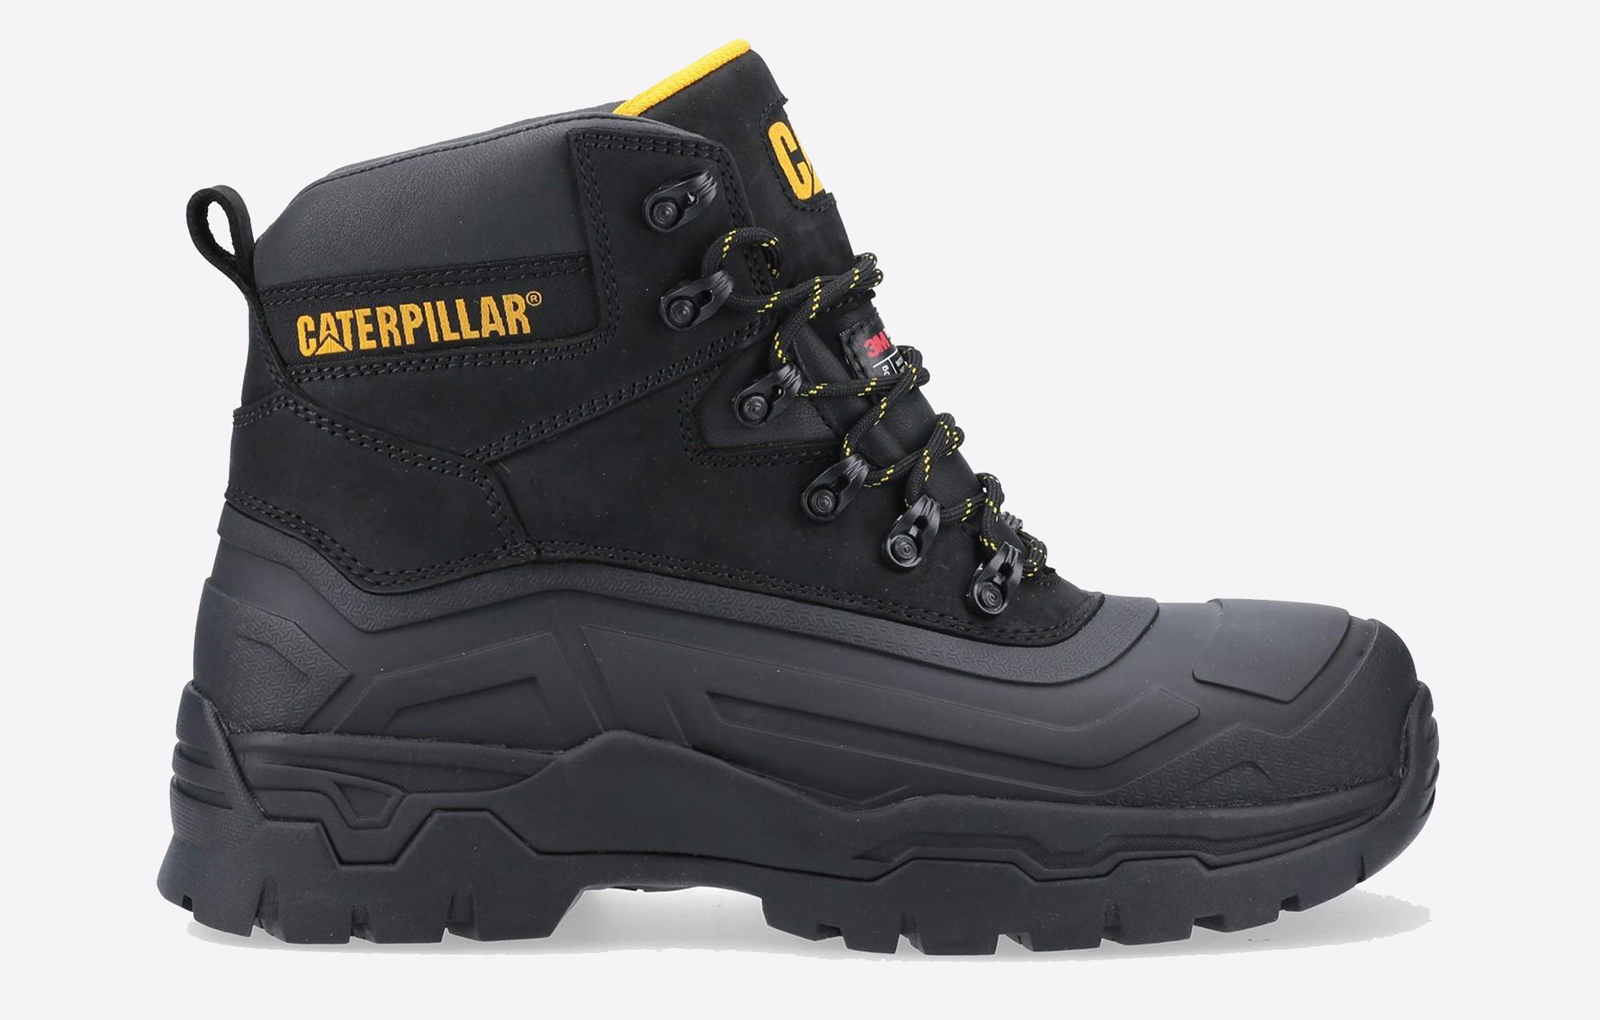 Caterpilar Typhoon SBH Safety Boot LEATHER Mens - GRD-33989-58022-10